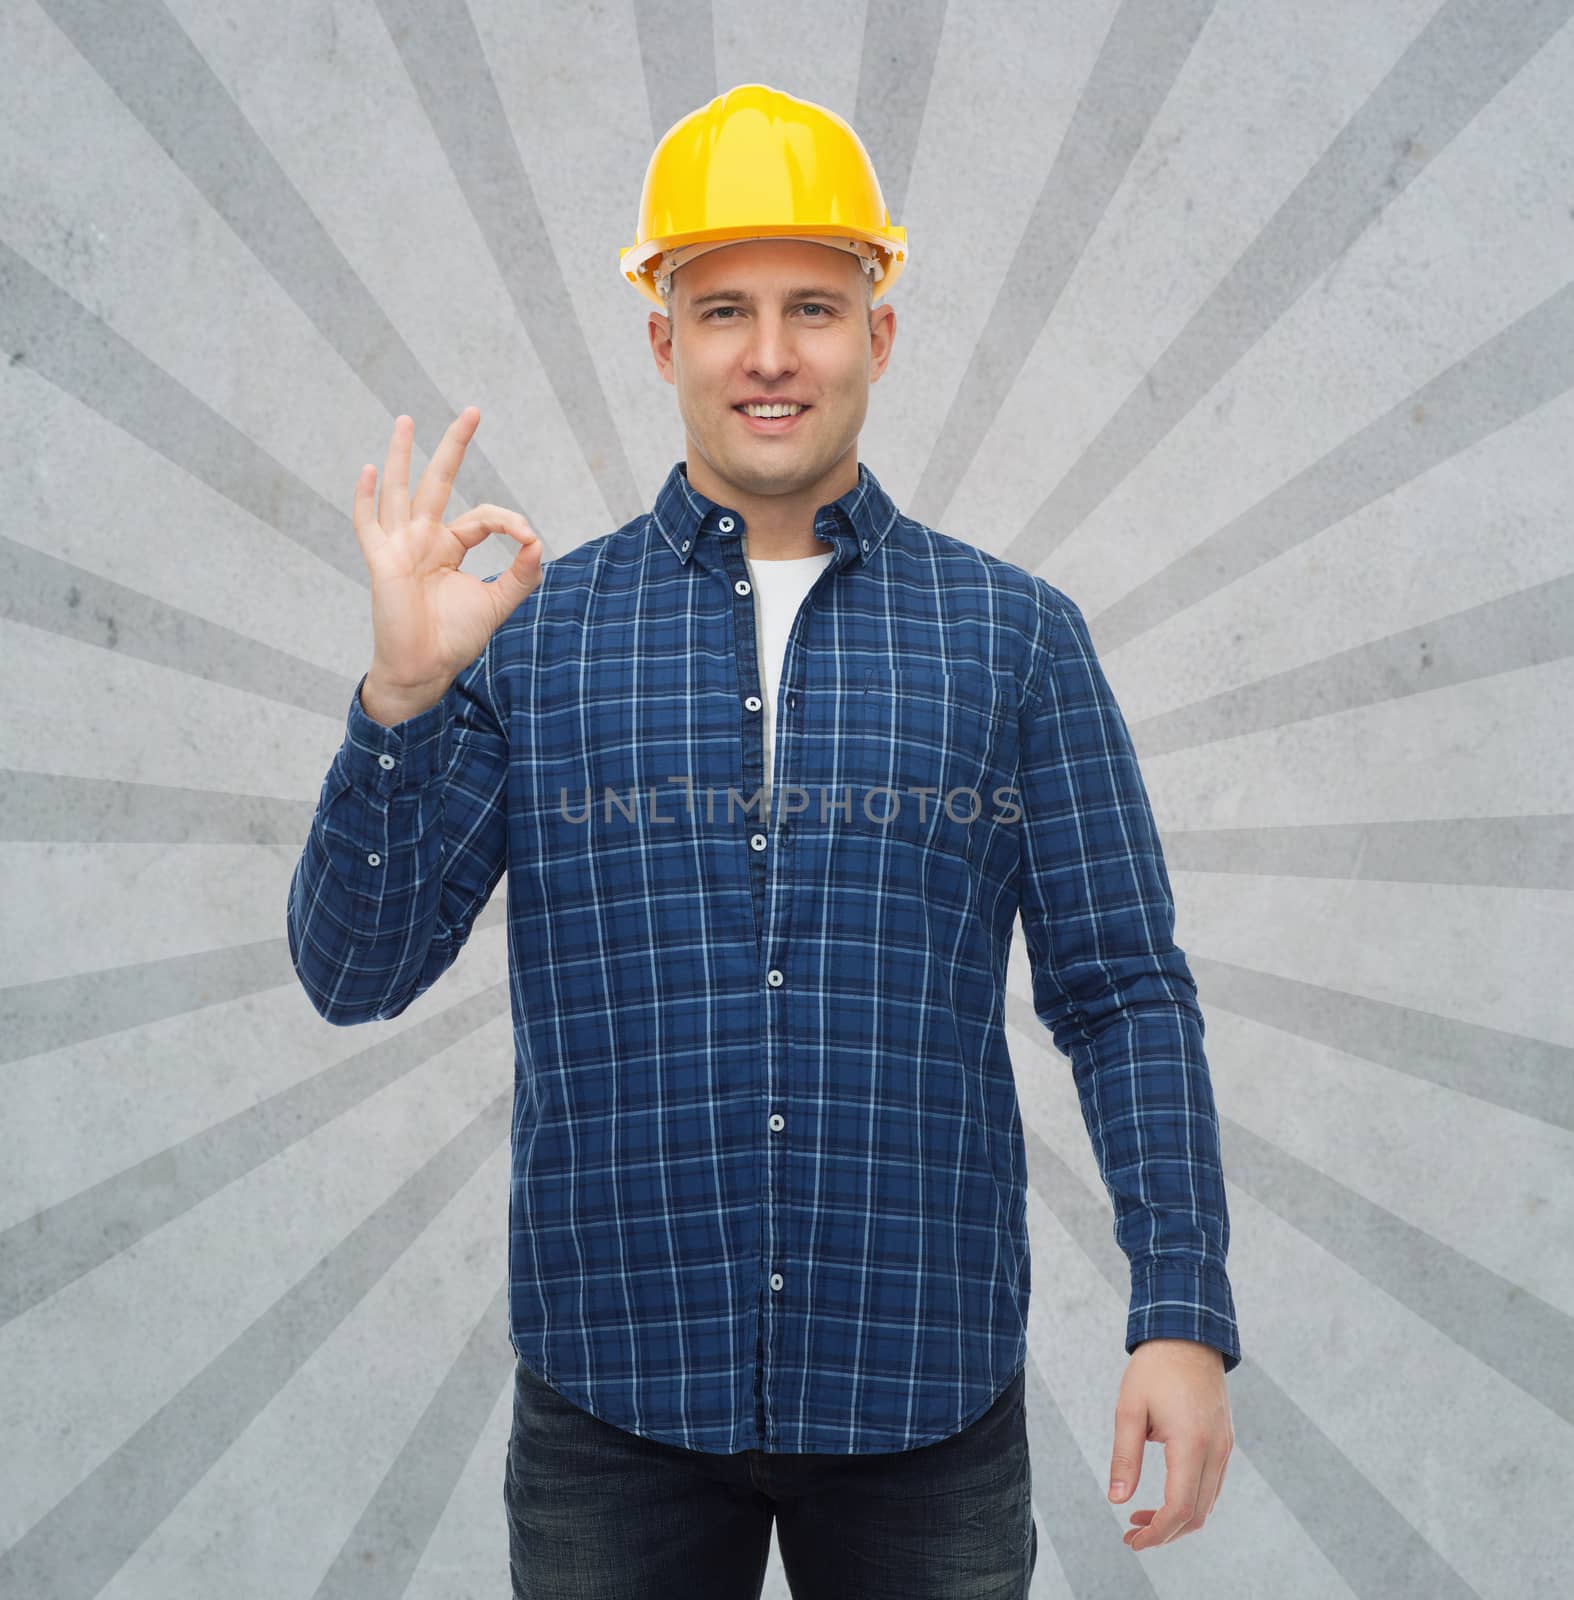 repair, construction, building, people and maintenance concept - smiling male builder or manual worker in helmet showing ok sign over gray burst rays background